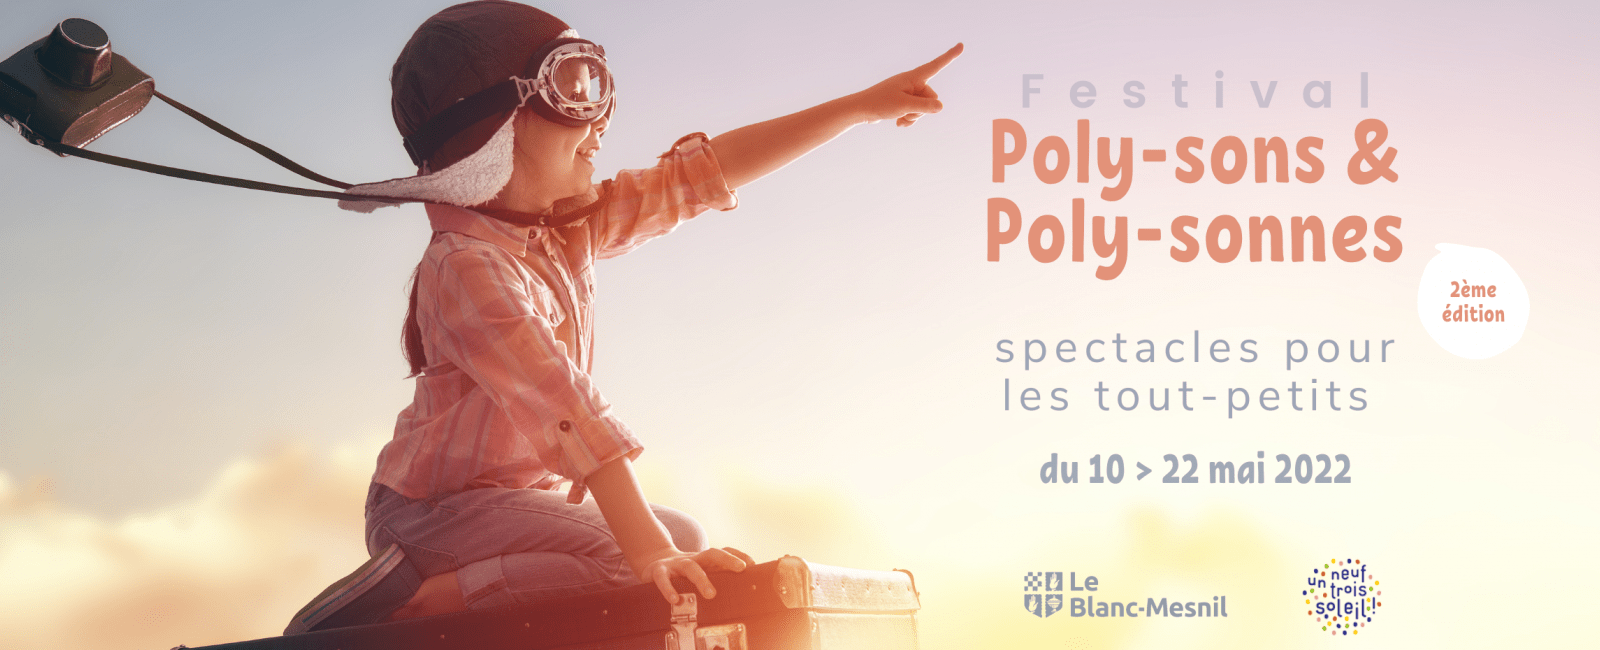 Festival Poly-sons & Poly-sonnes